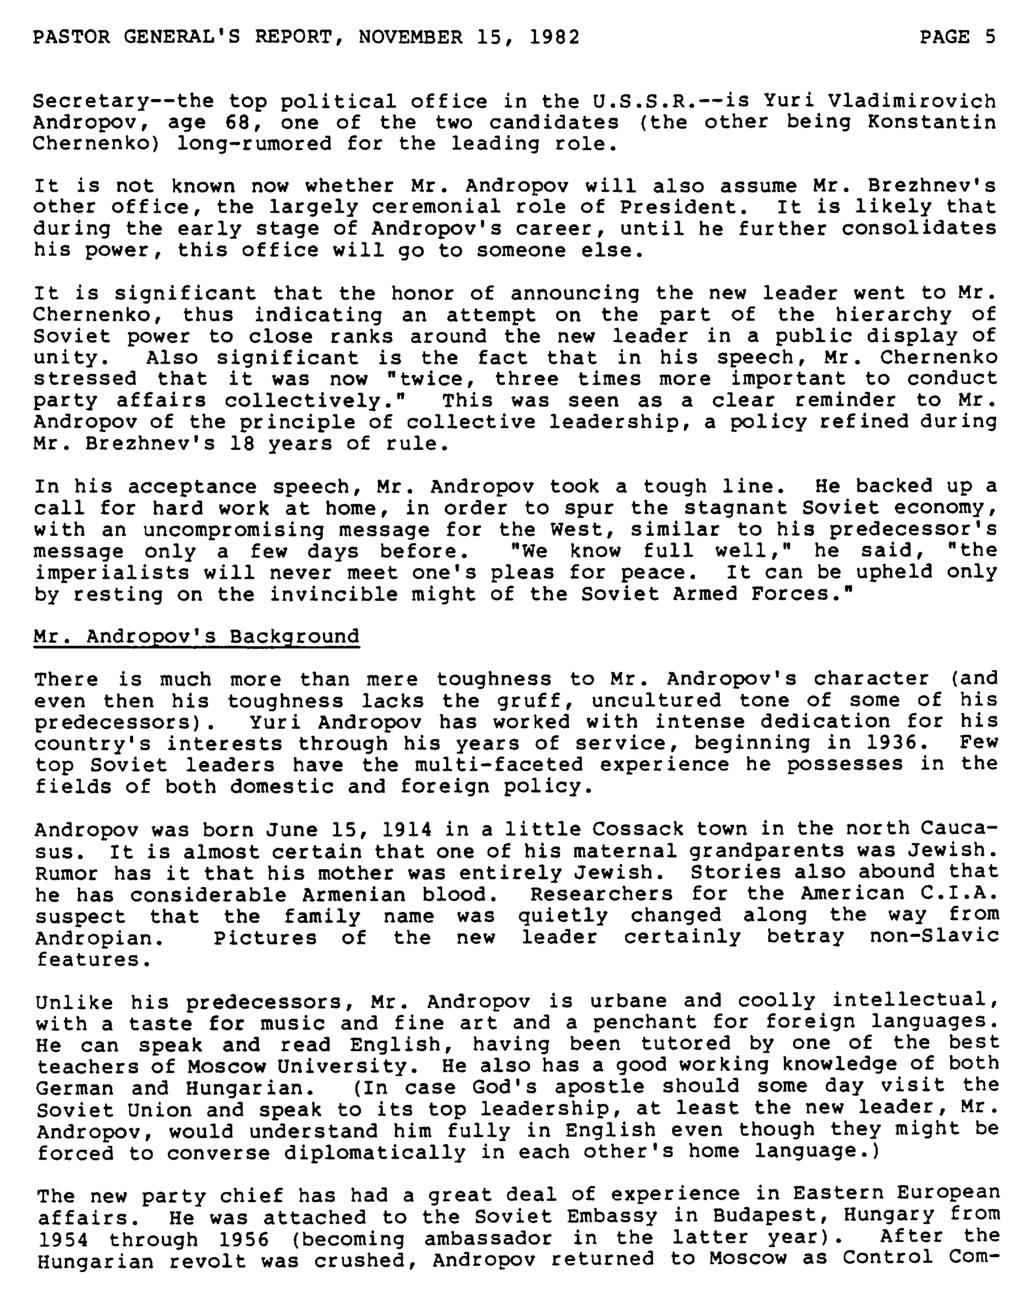 PASTOR GENERAL'S REPORT, NOVEMBER 15, 1982 PAGE 5 Secretary--the top political office in the U.S.S.R.--is Yuri Vladimirovich Andropov, age 68, one of the two candidates (the other being Konstantin Chernenko) long-rumored for the leading role.